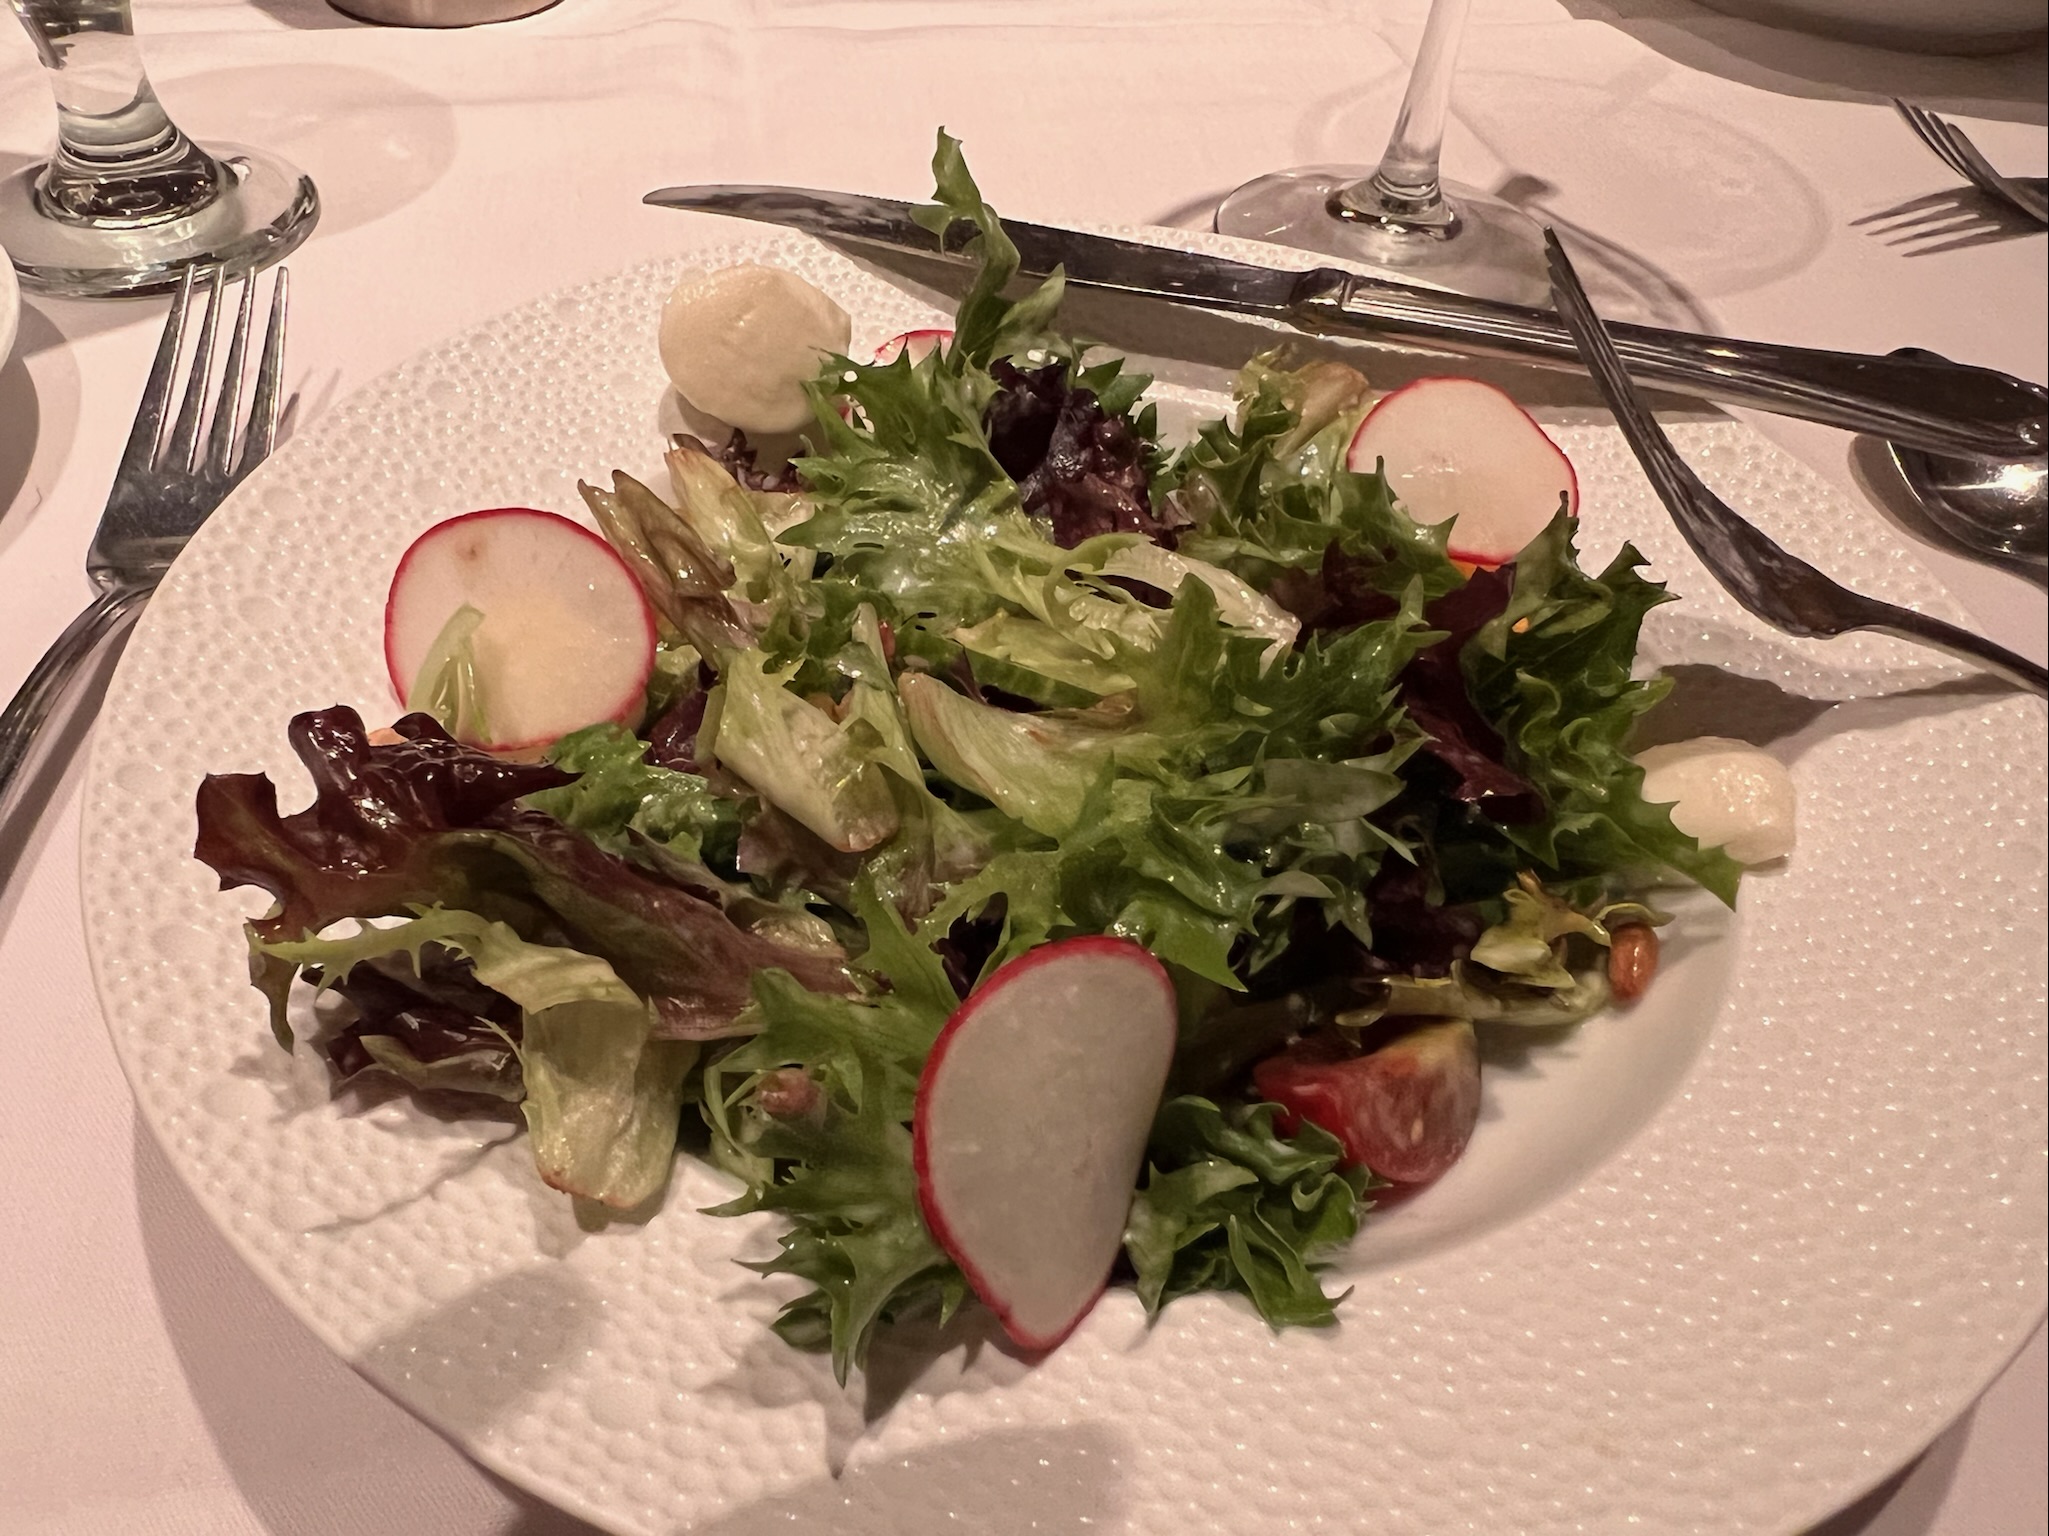 Salad at Boathouse Restaurant in Traverse City